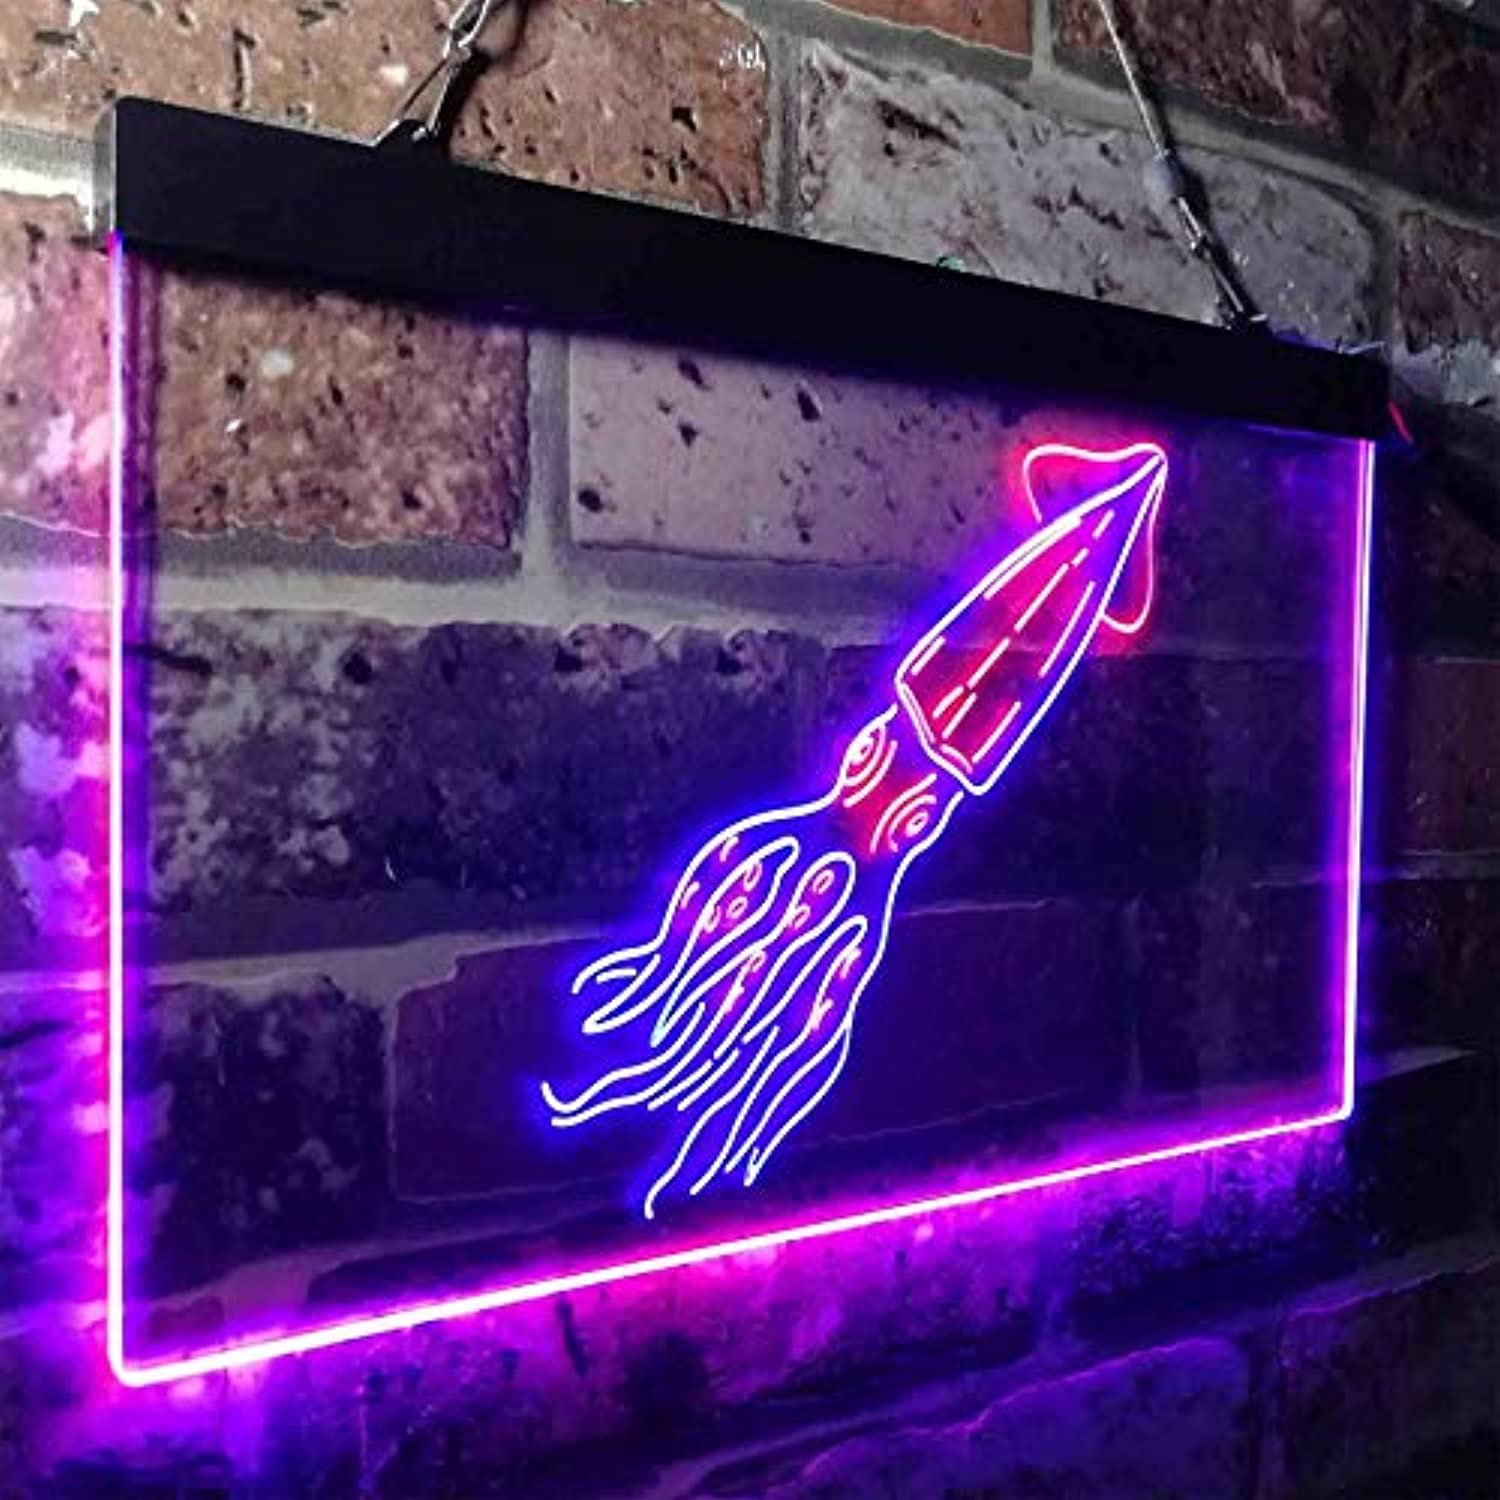 Squid Animal Ocean Display LED Neon Light Sign - Way Up Gifts